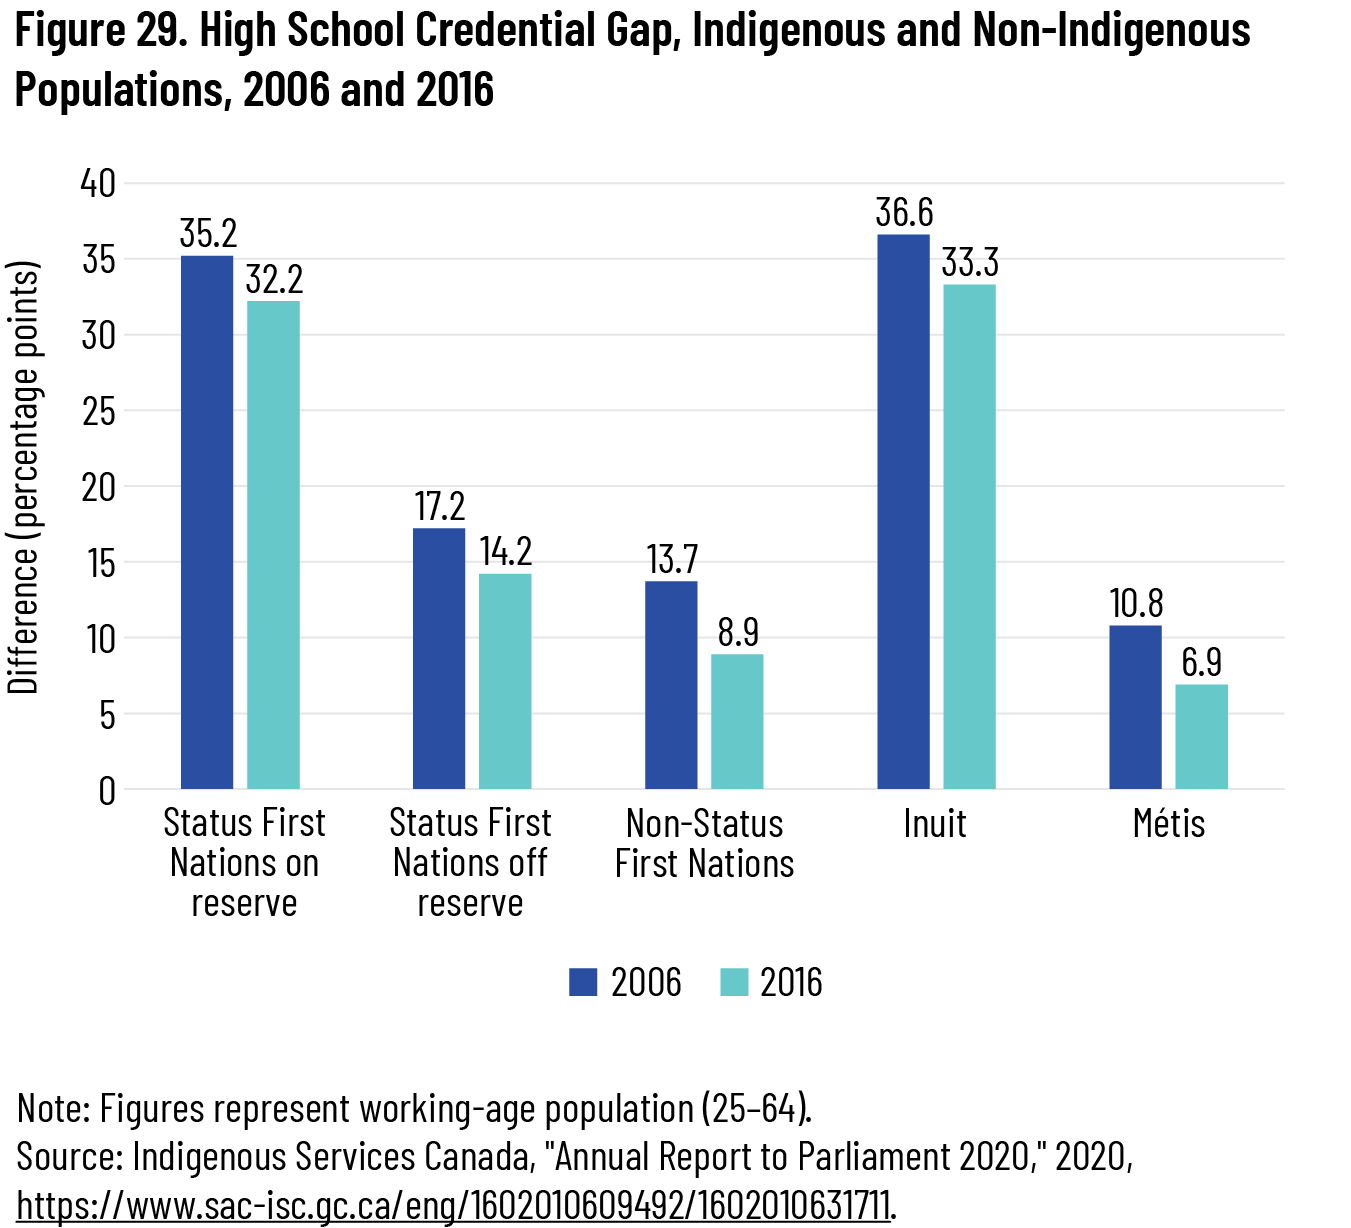 Figure 29. High School Credential Gap, Indigenous and Non-Indigenous Populations, 2006 and 2016